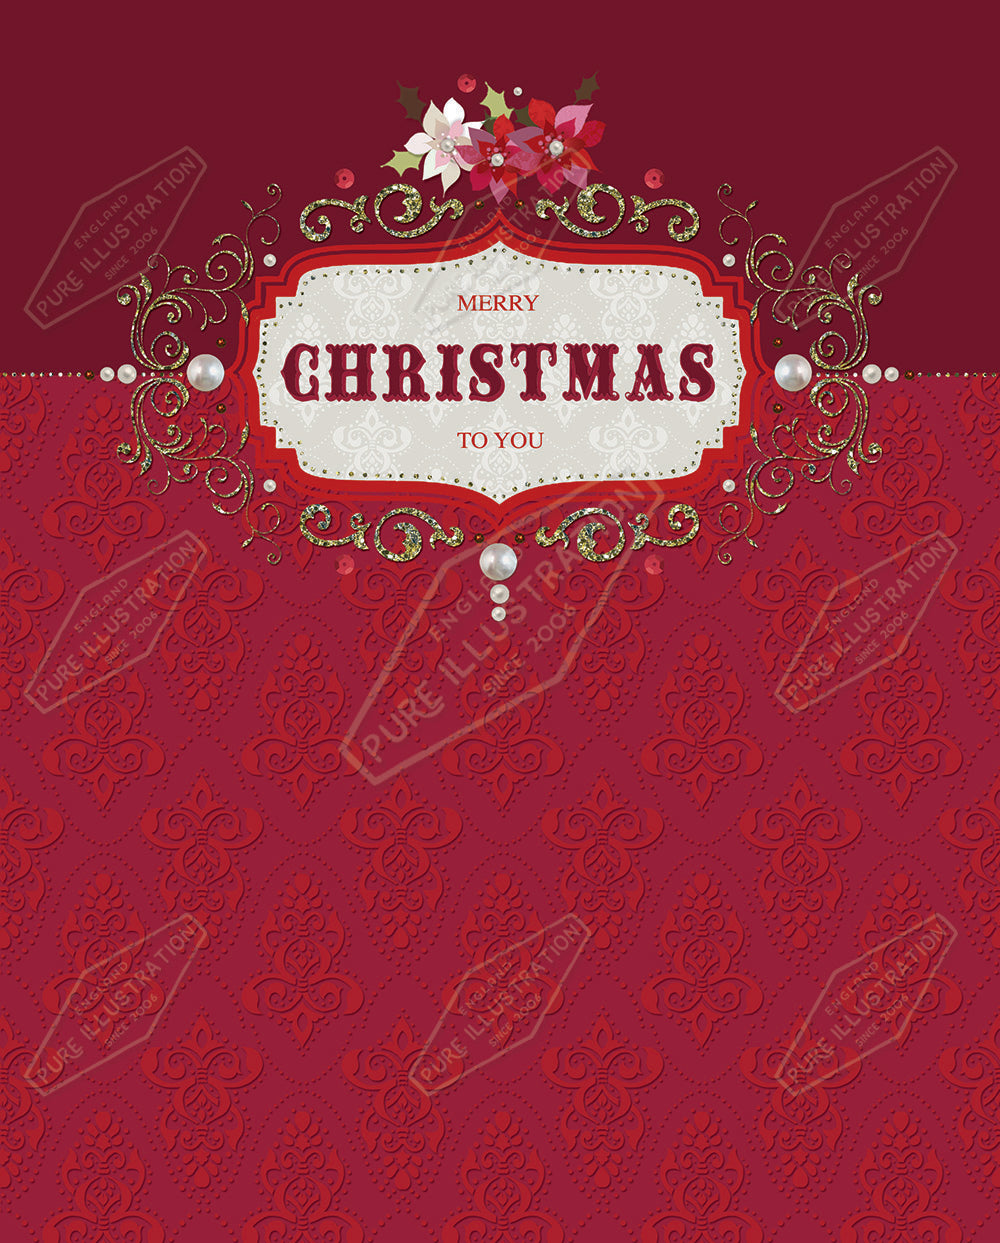 00032199KSP- Kerry Spurling is represented by Pure Art Licensing Agency - Christmas Greeting Card Design